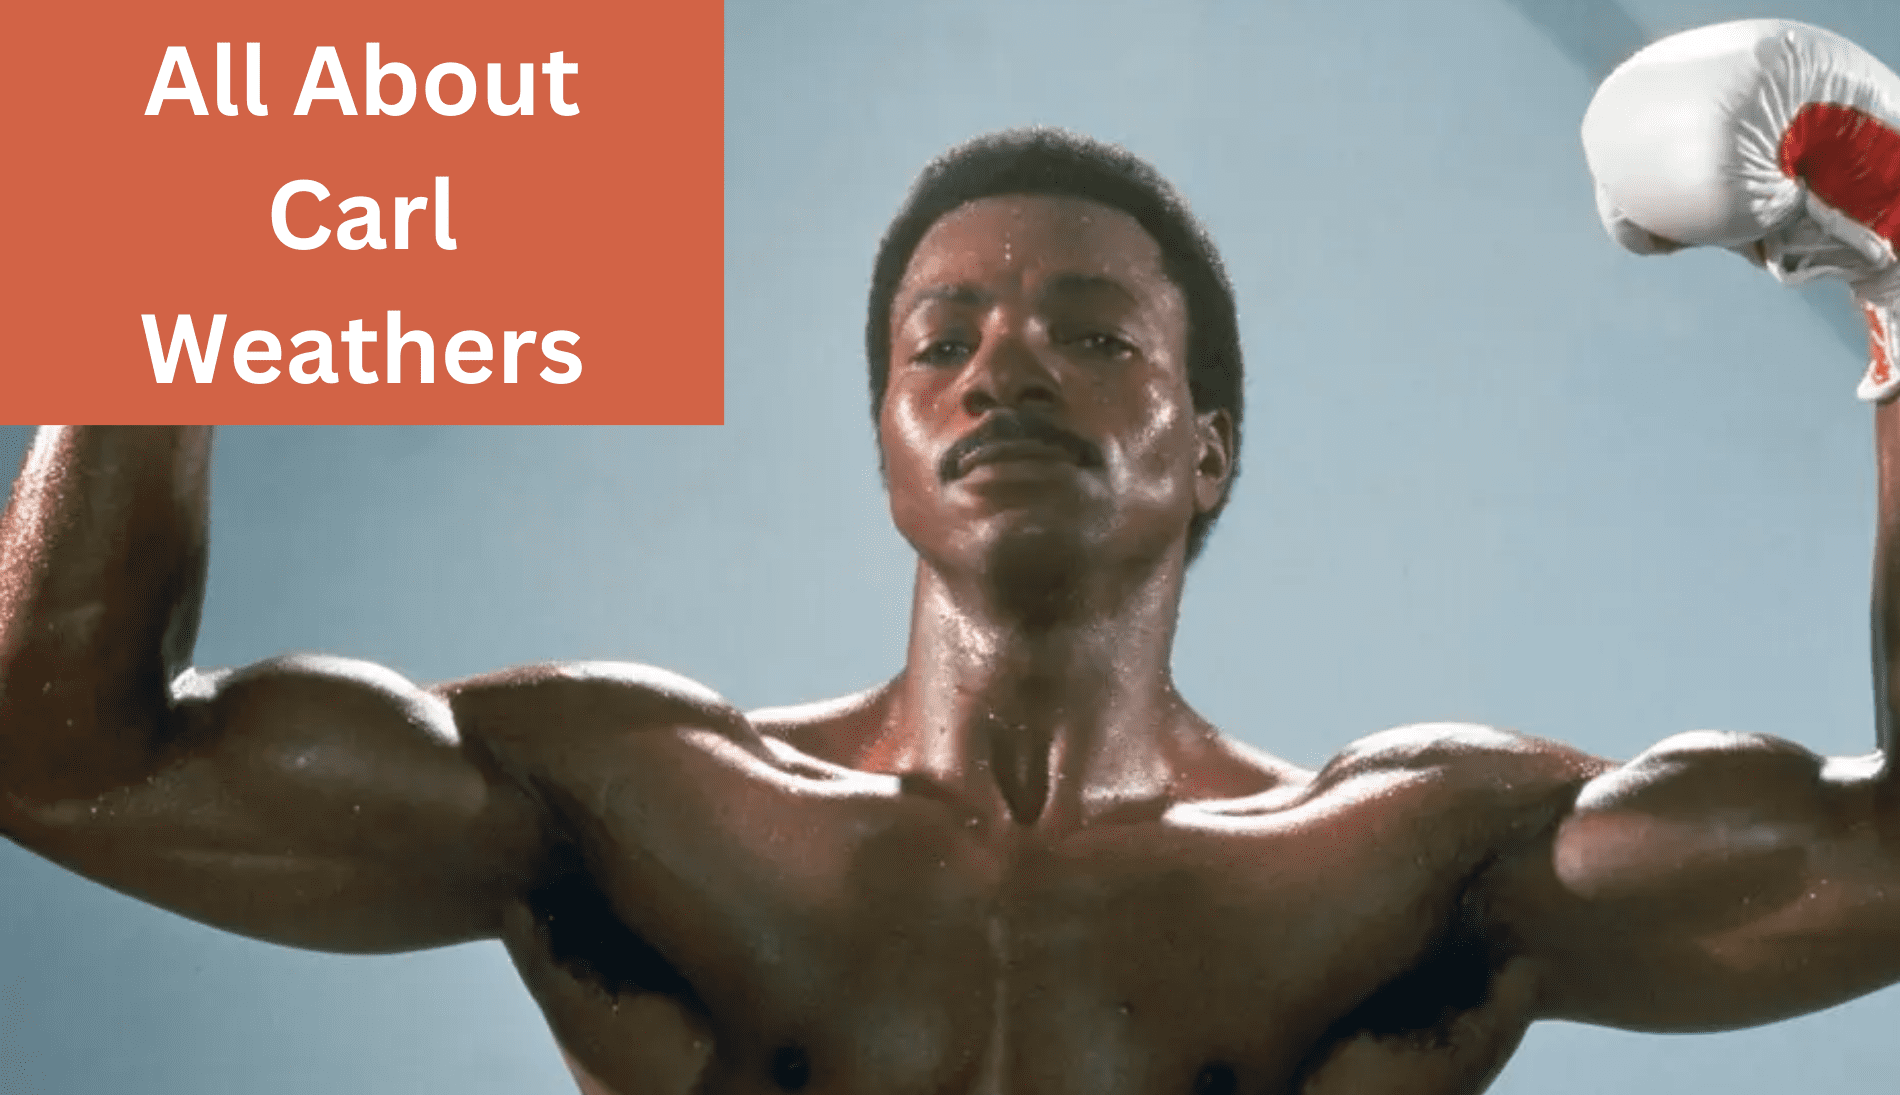 All About Carl Weathers